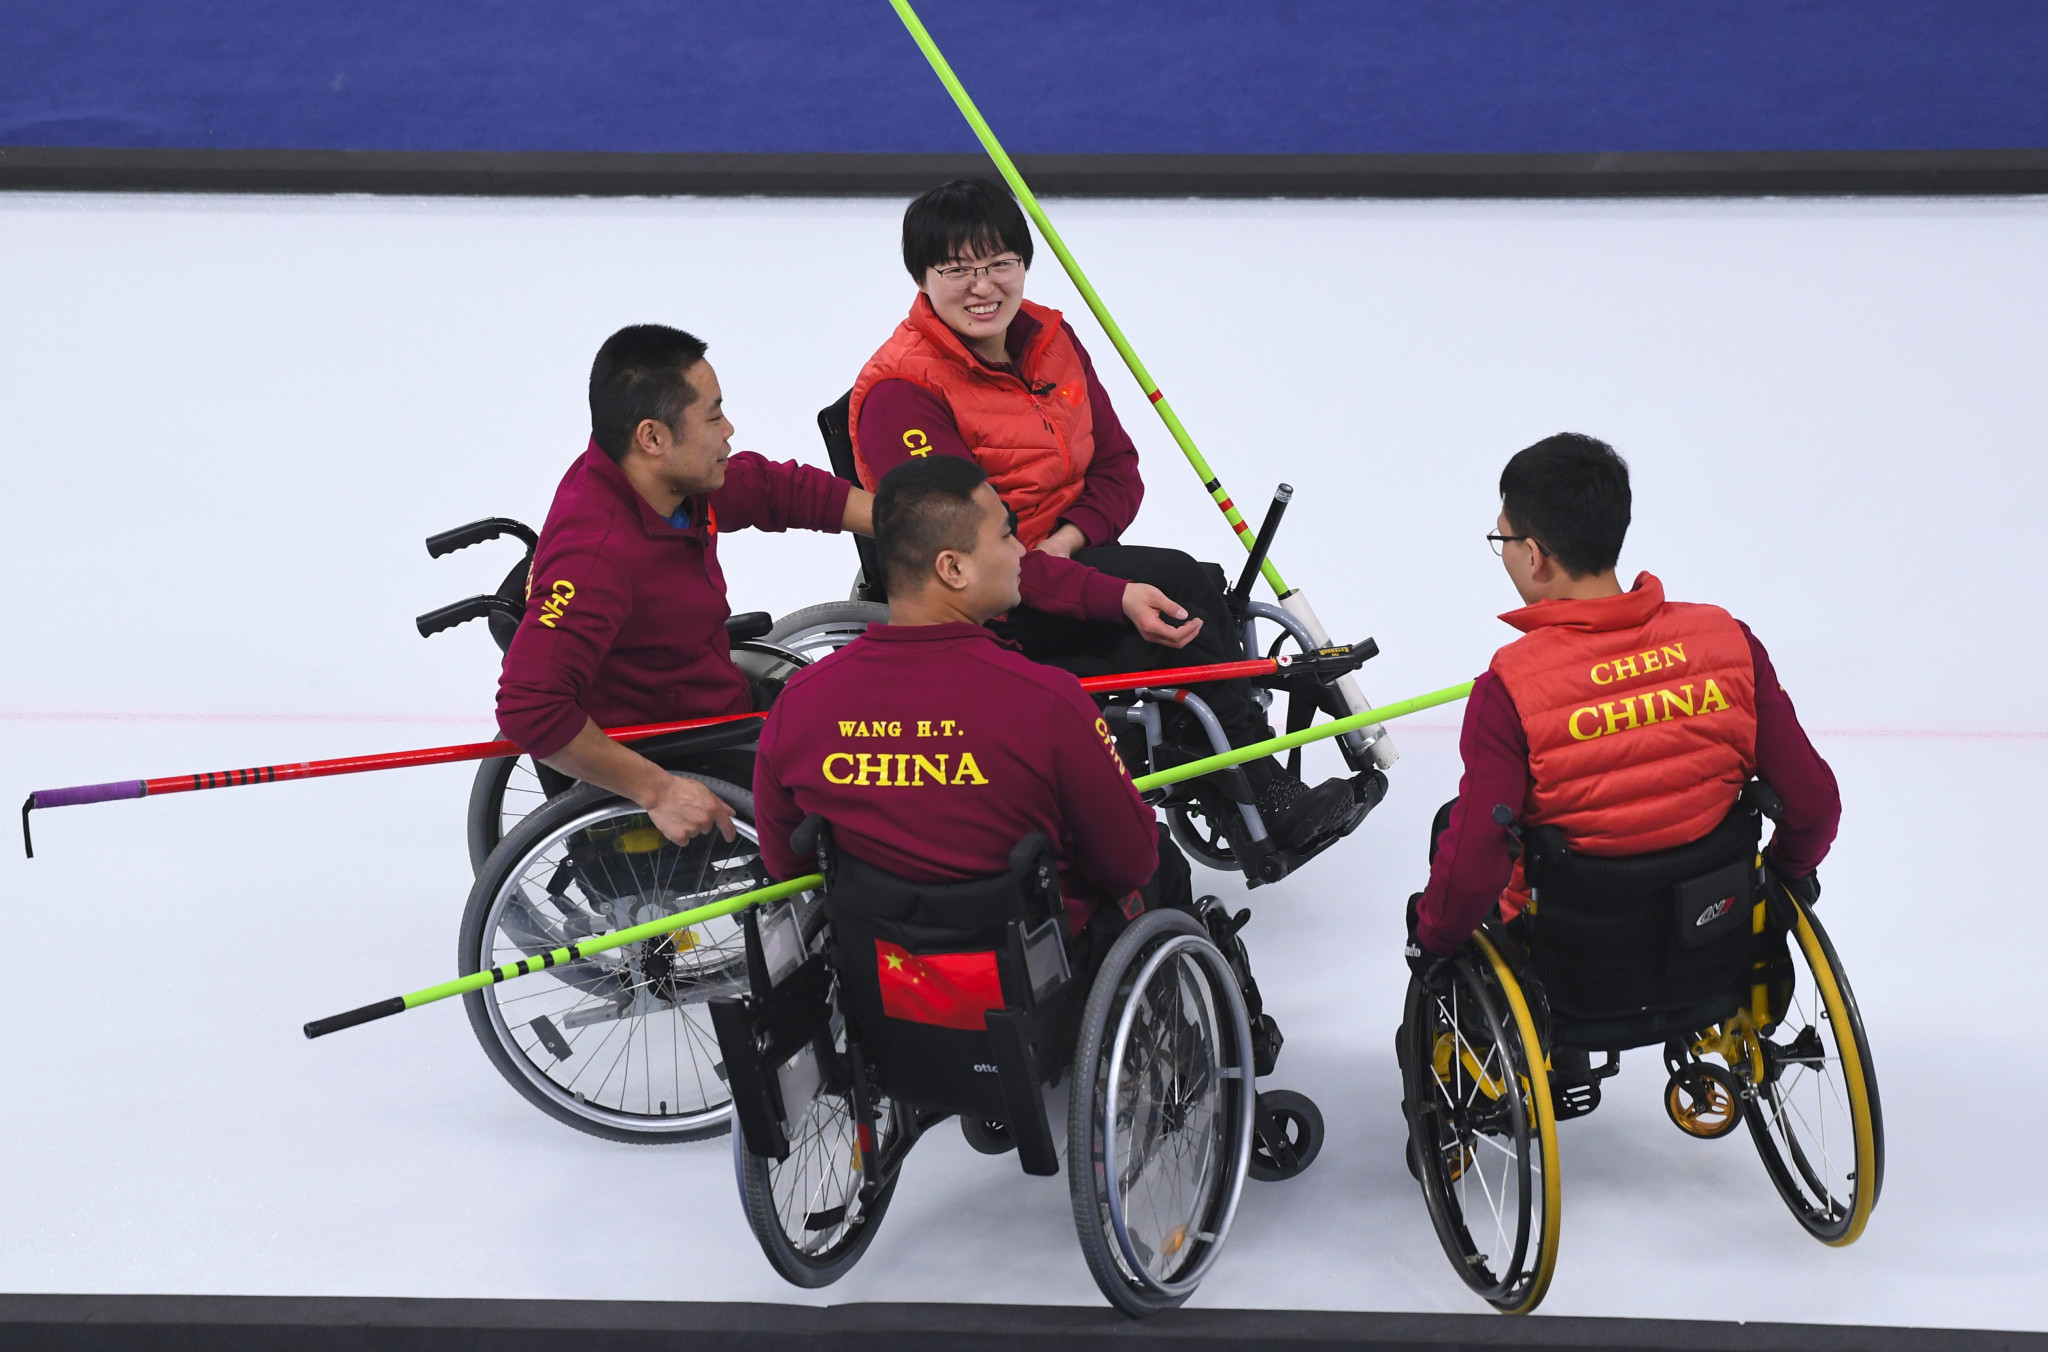 China will hope to add to their sole Winter Paralympic gold, won in wheelchair curling at Pyeongchang 2018 ©Getty Images